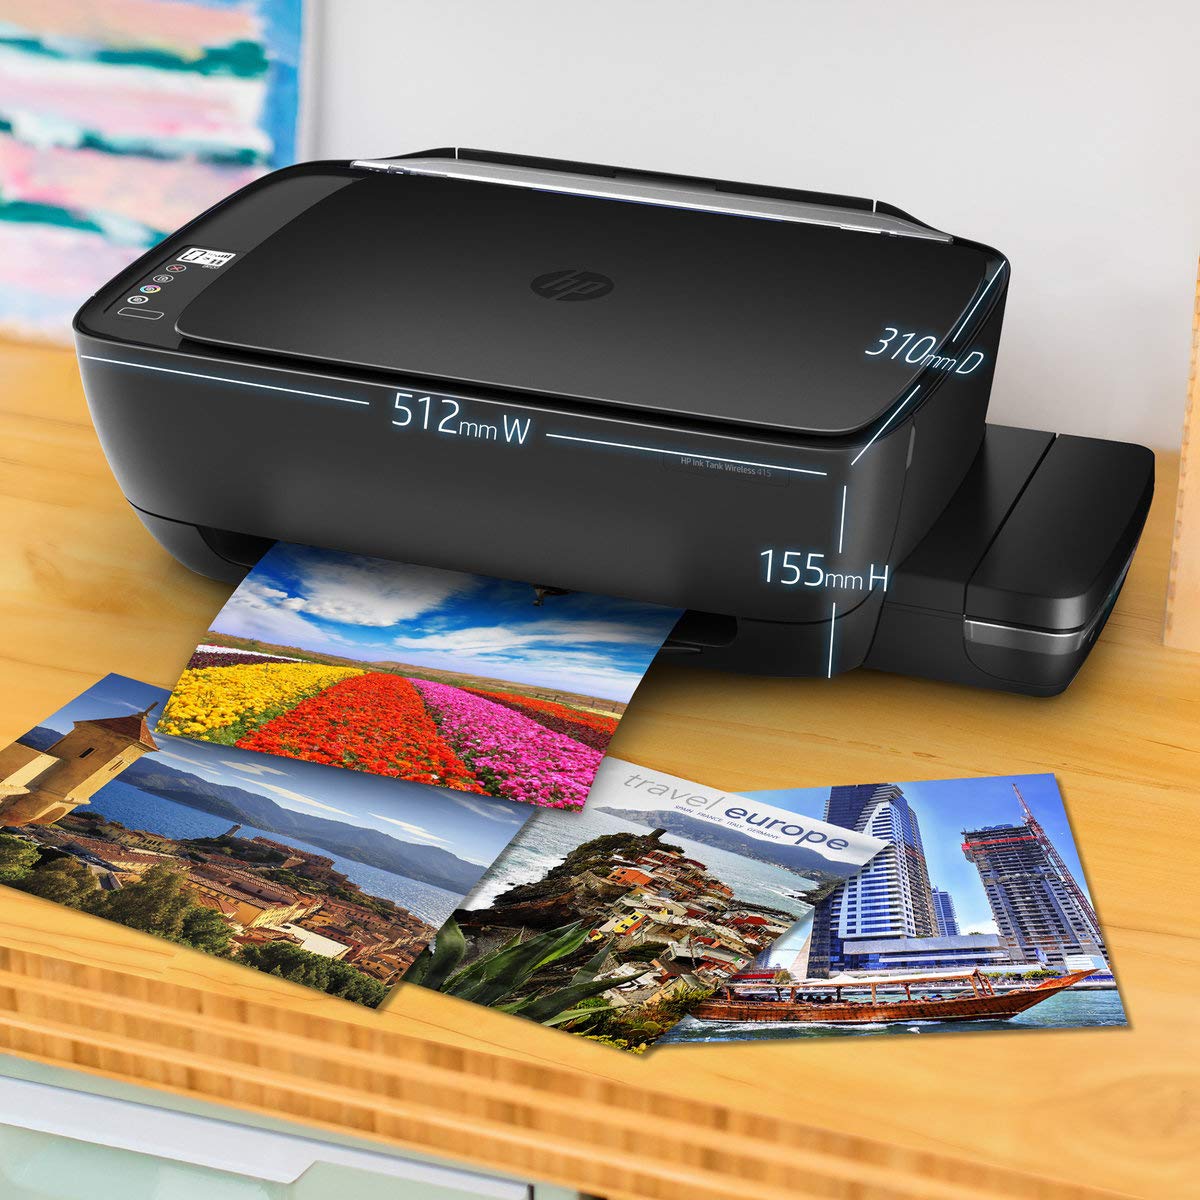 HP 415 All-in-one Ink Tank Wireless Color Printer